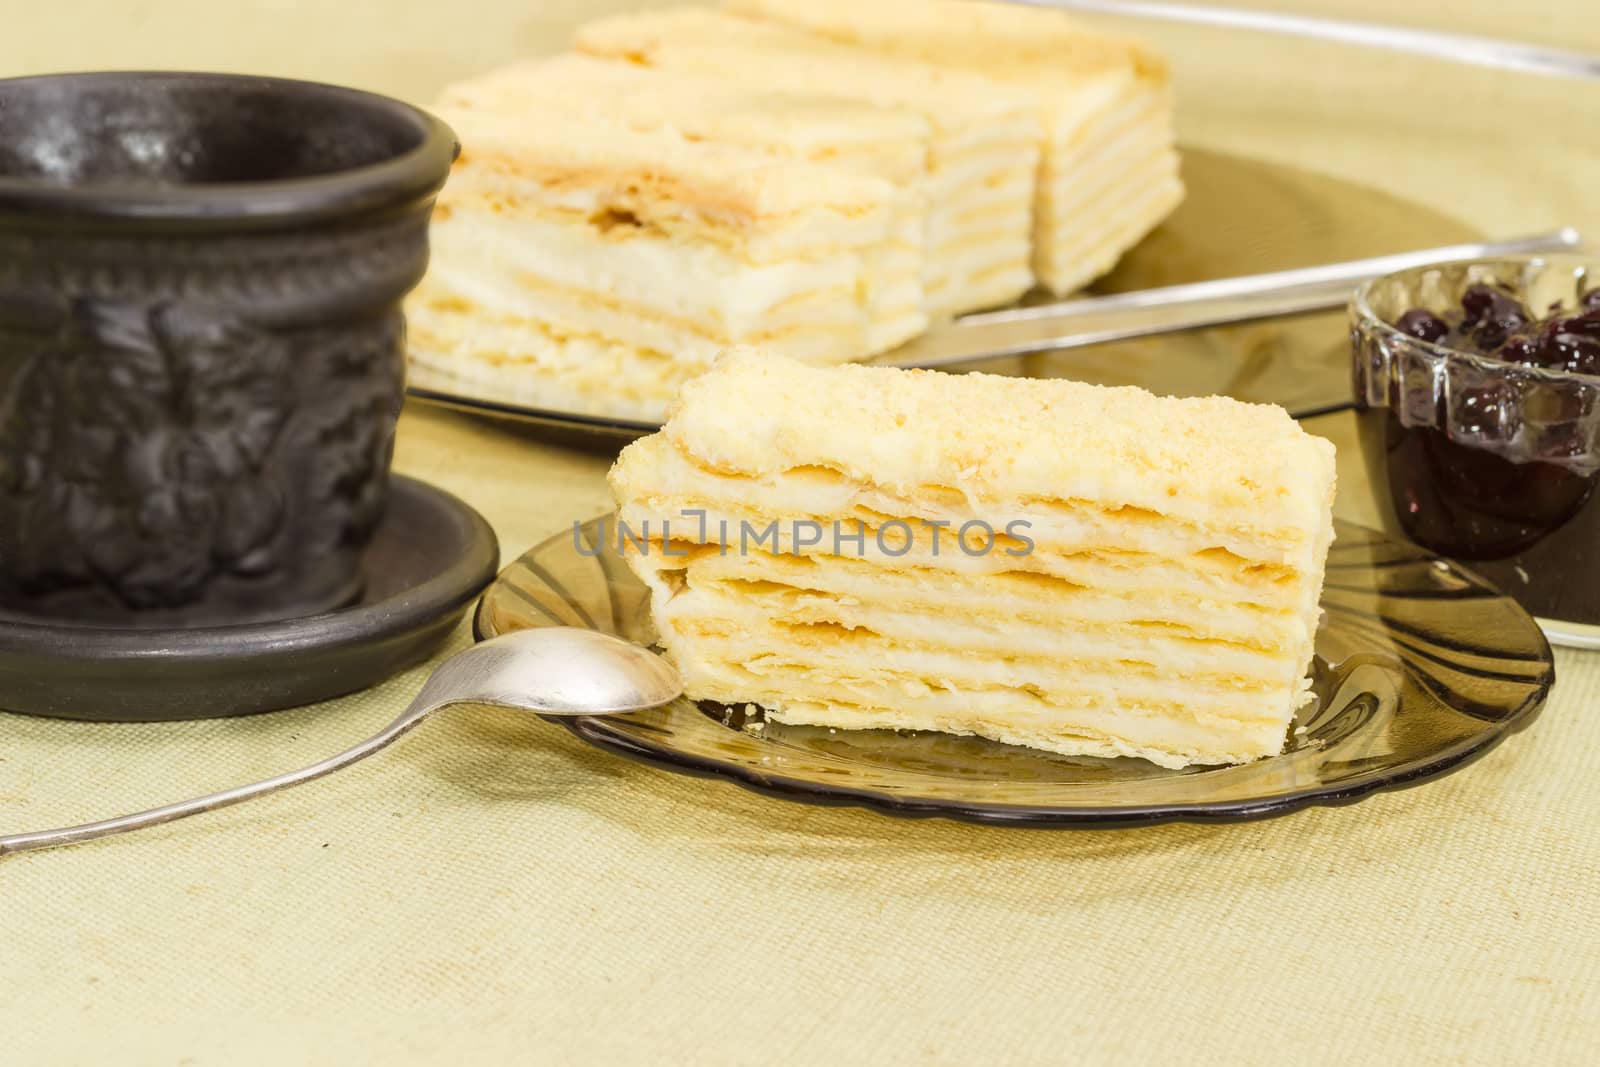 Piece of layered sponge cake on a glass saucer with spoon on the background of the rest of the cake, black cup and jam closeup on a cloth surface
